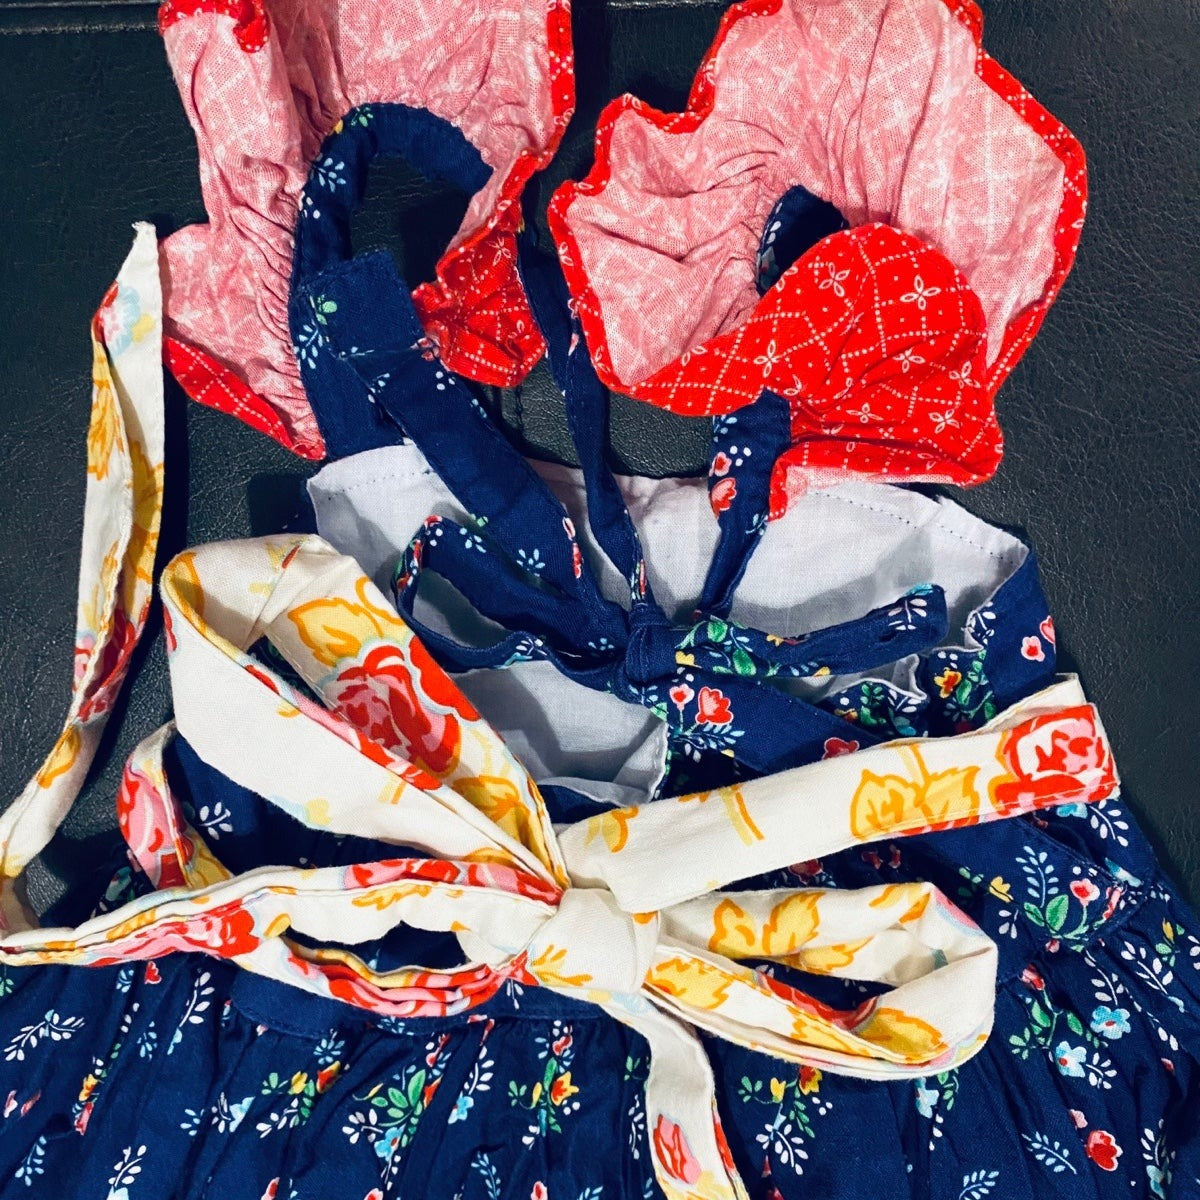 18-24 months to 2T floral ruffle dress